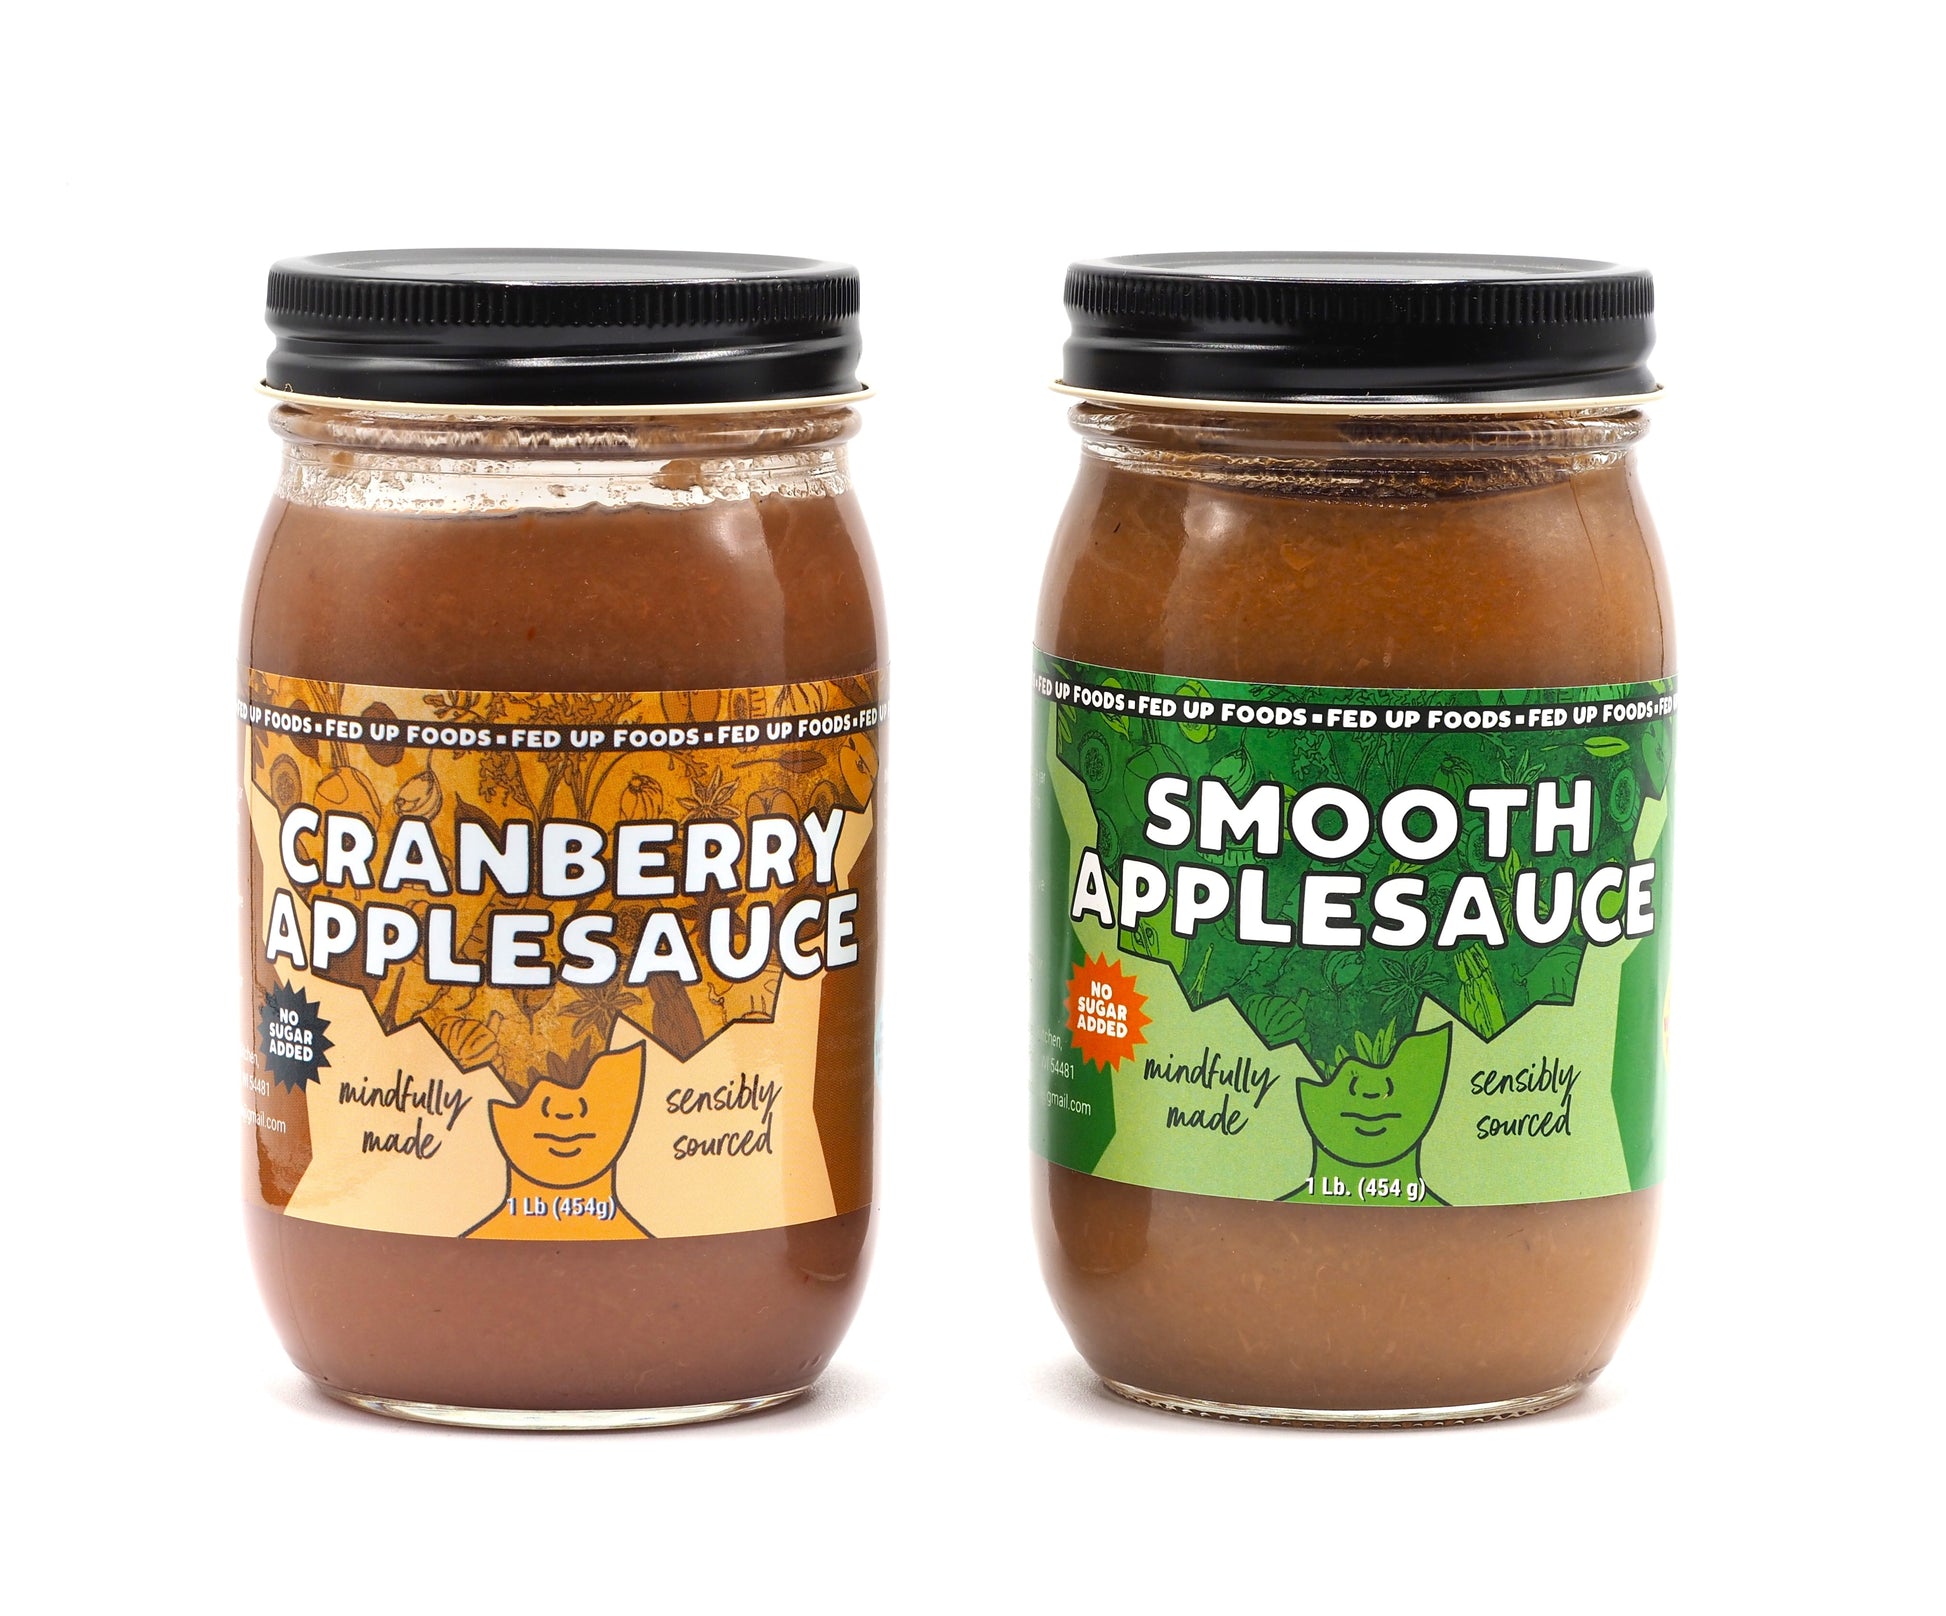 Fed Up Foods Cranberry Applesauce and Smooth Applesauce in a 2 pack Variety Pack